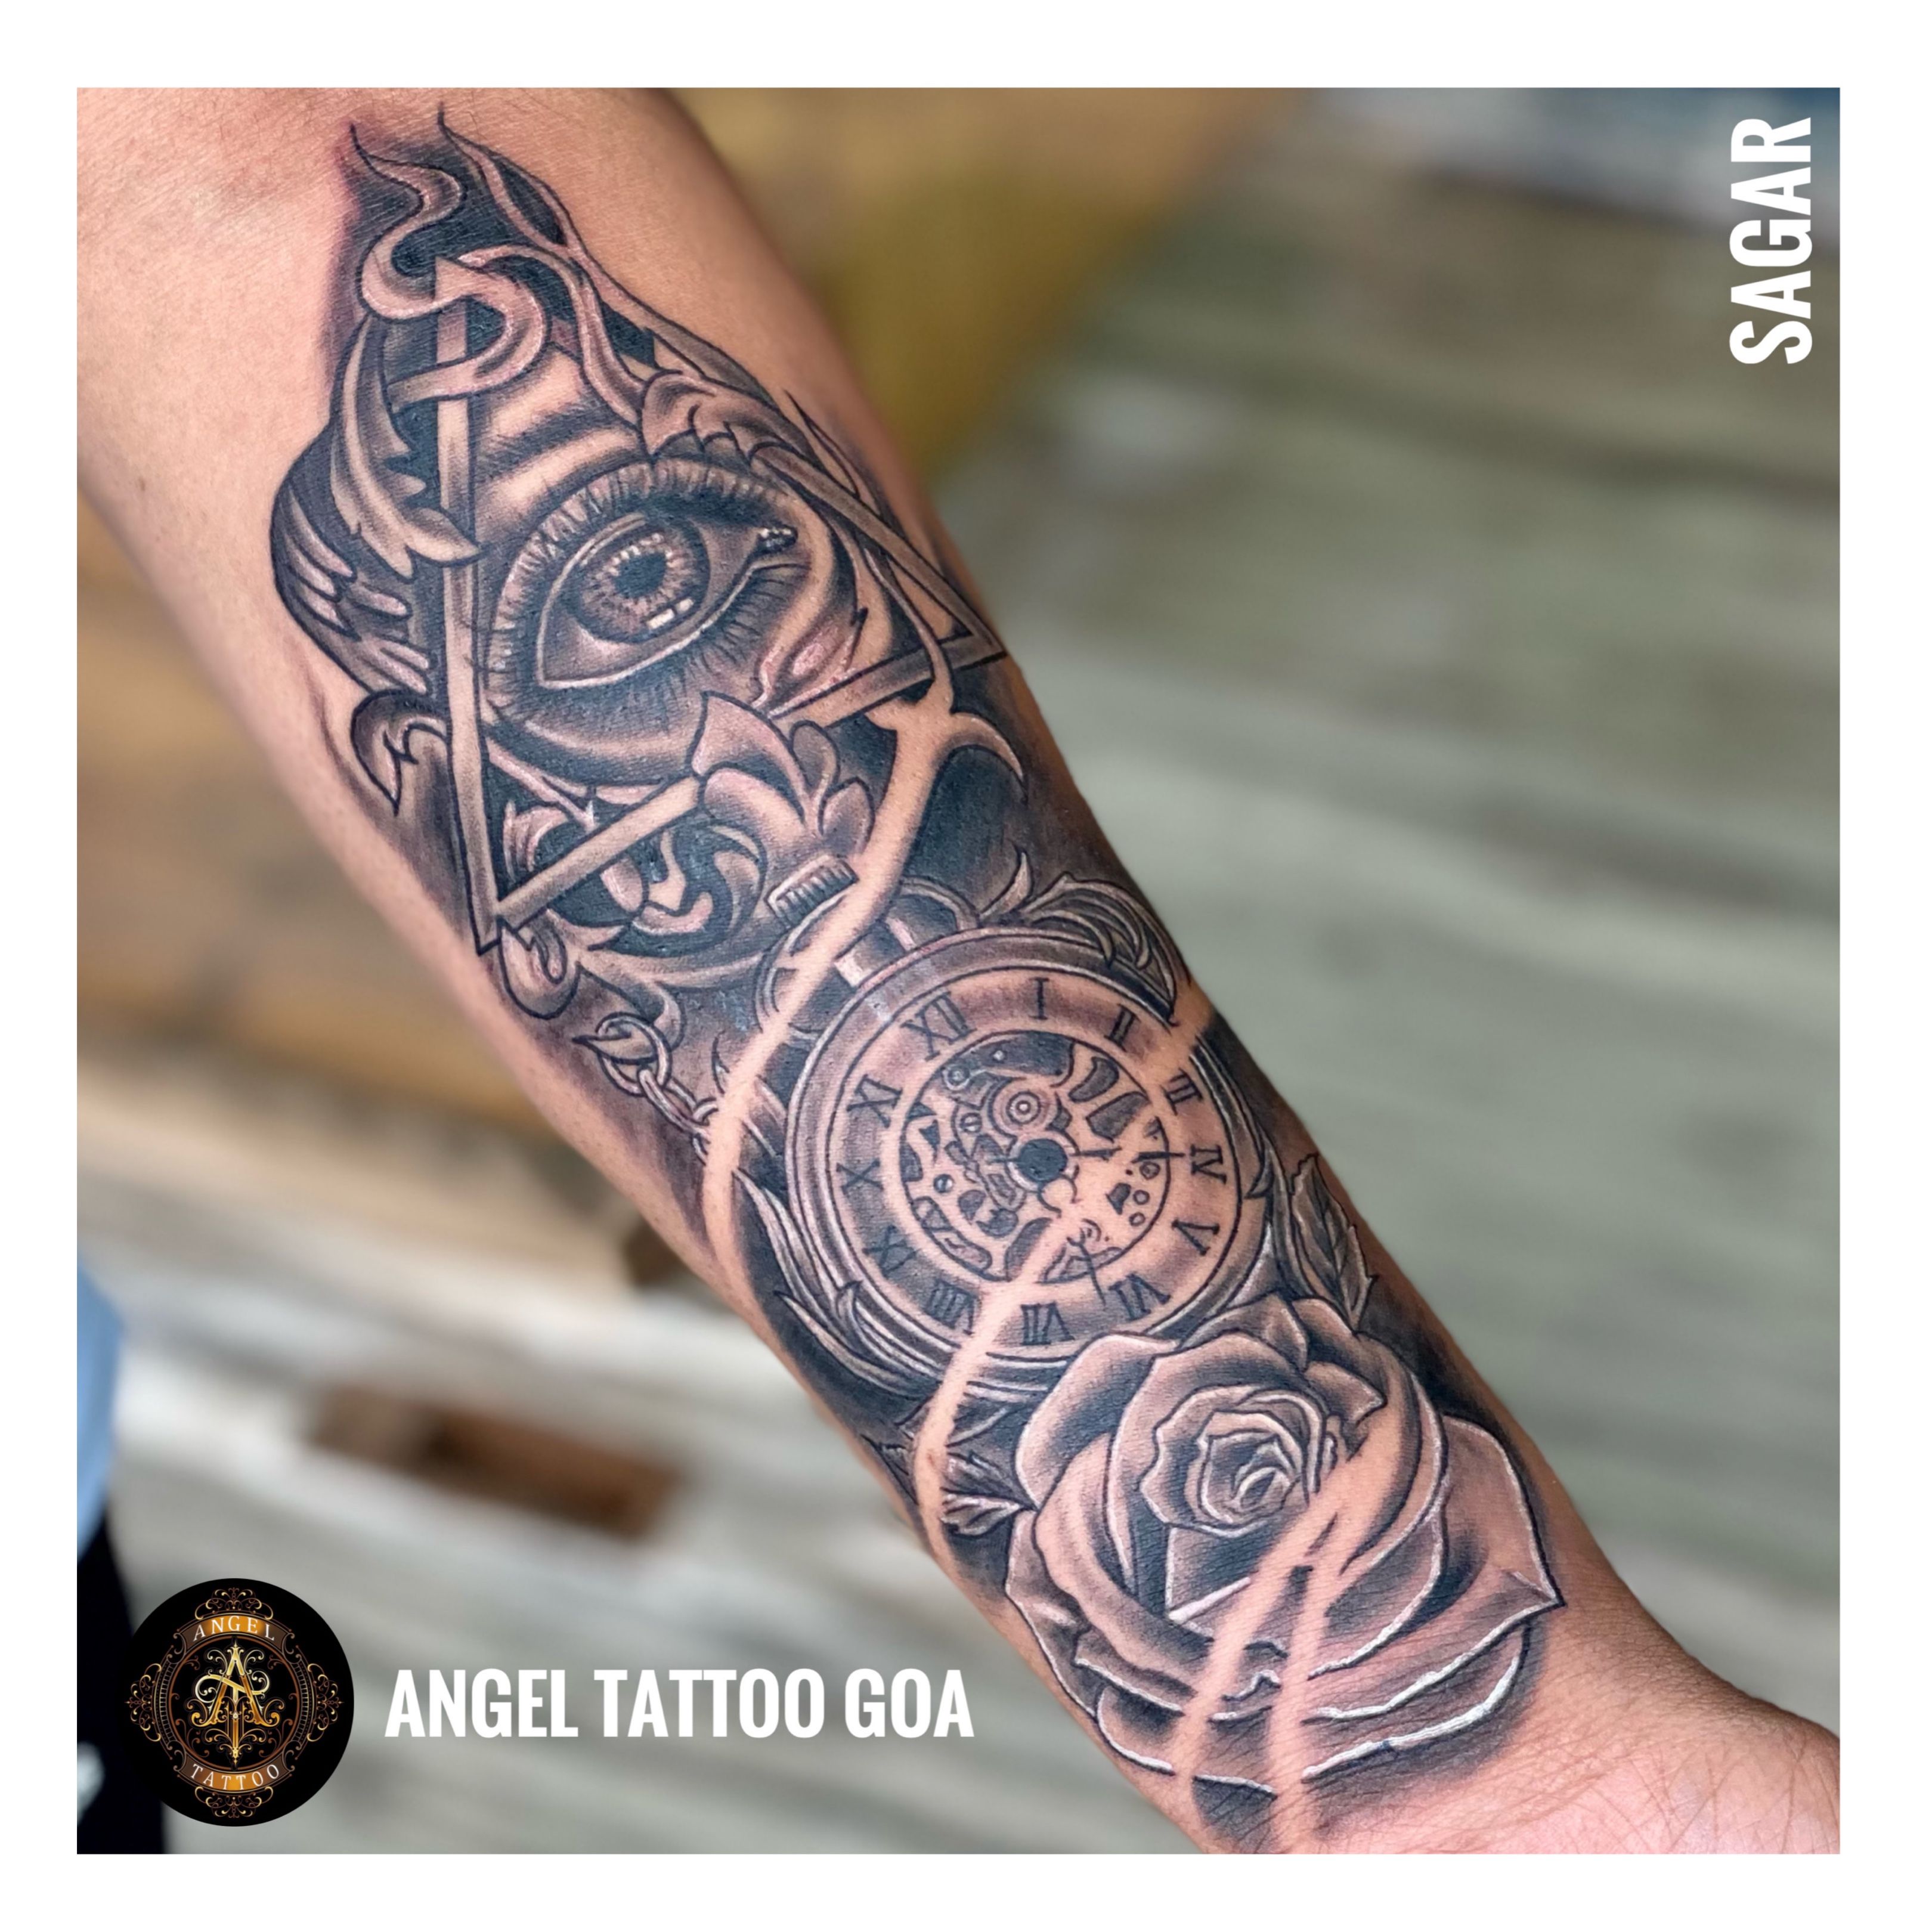 Majority of Tattoo Artists from Goa have their Studios in the North Goa.